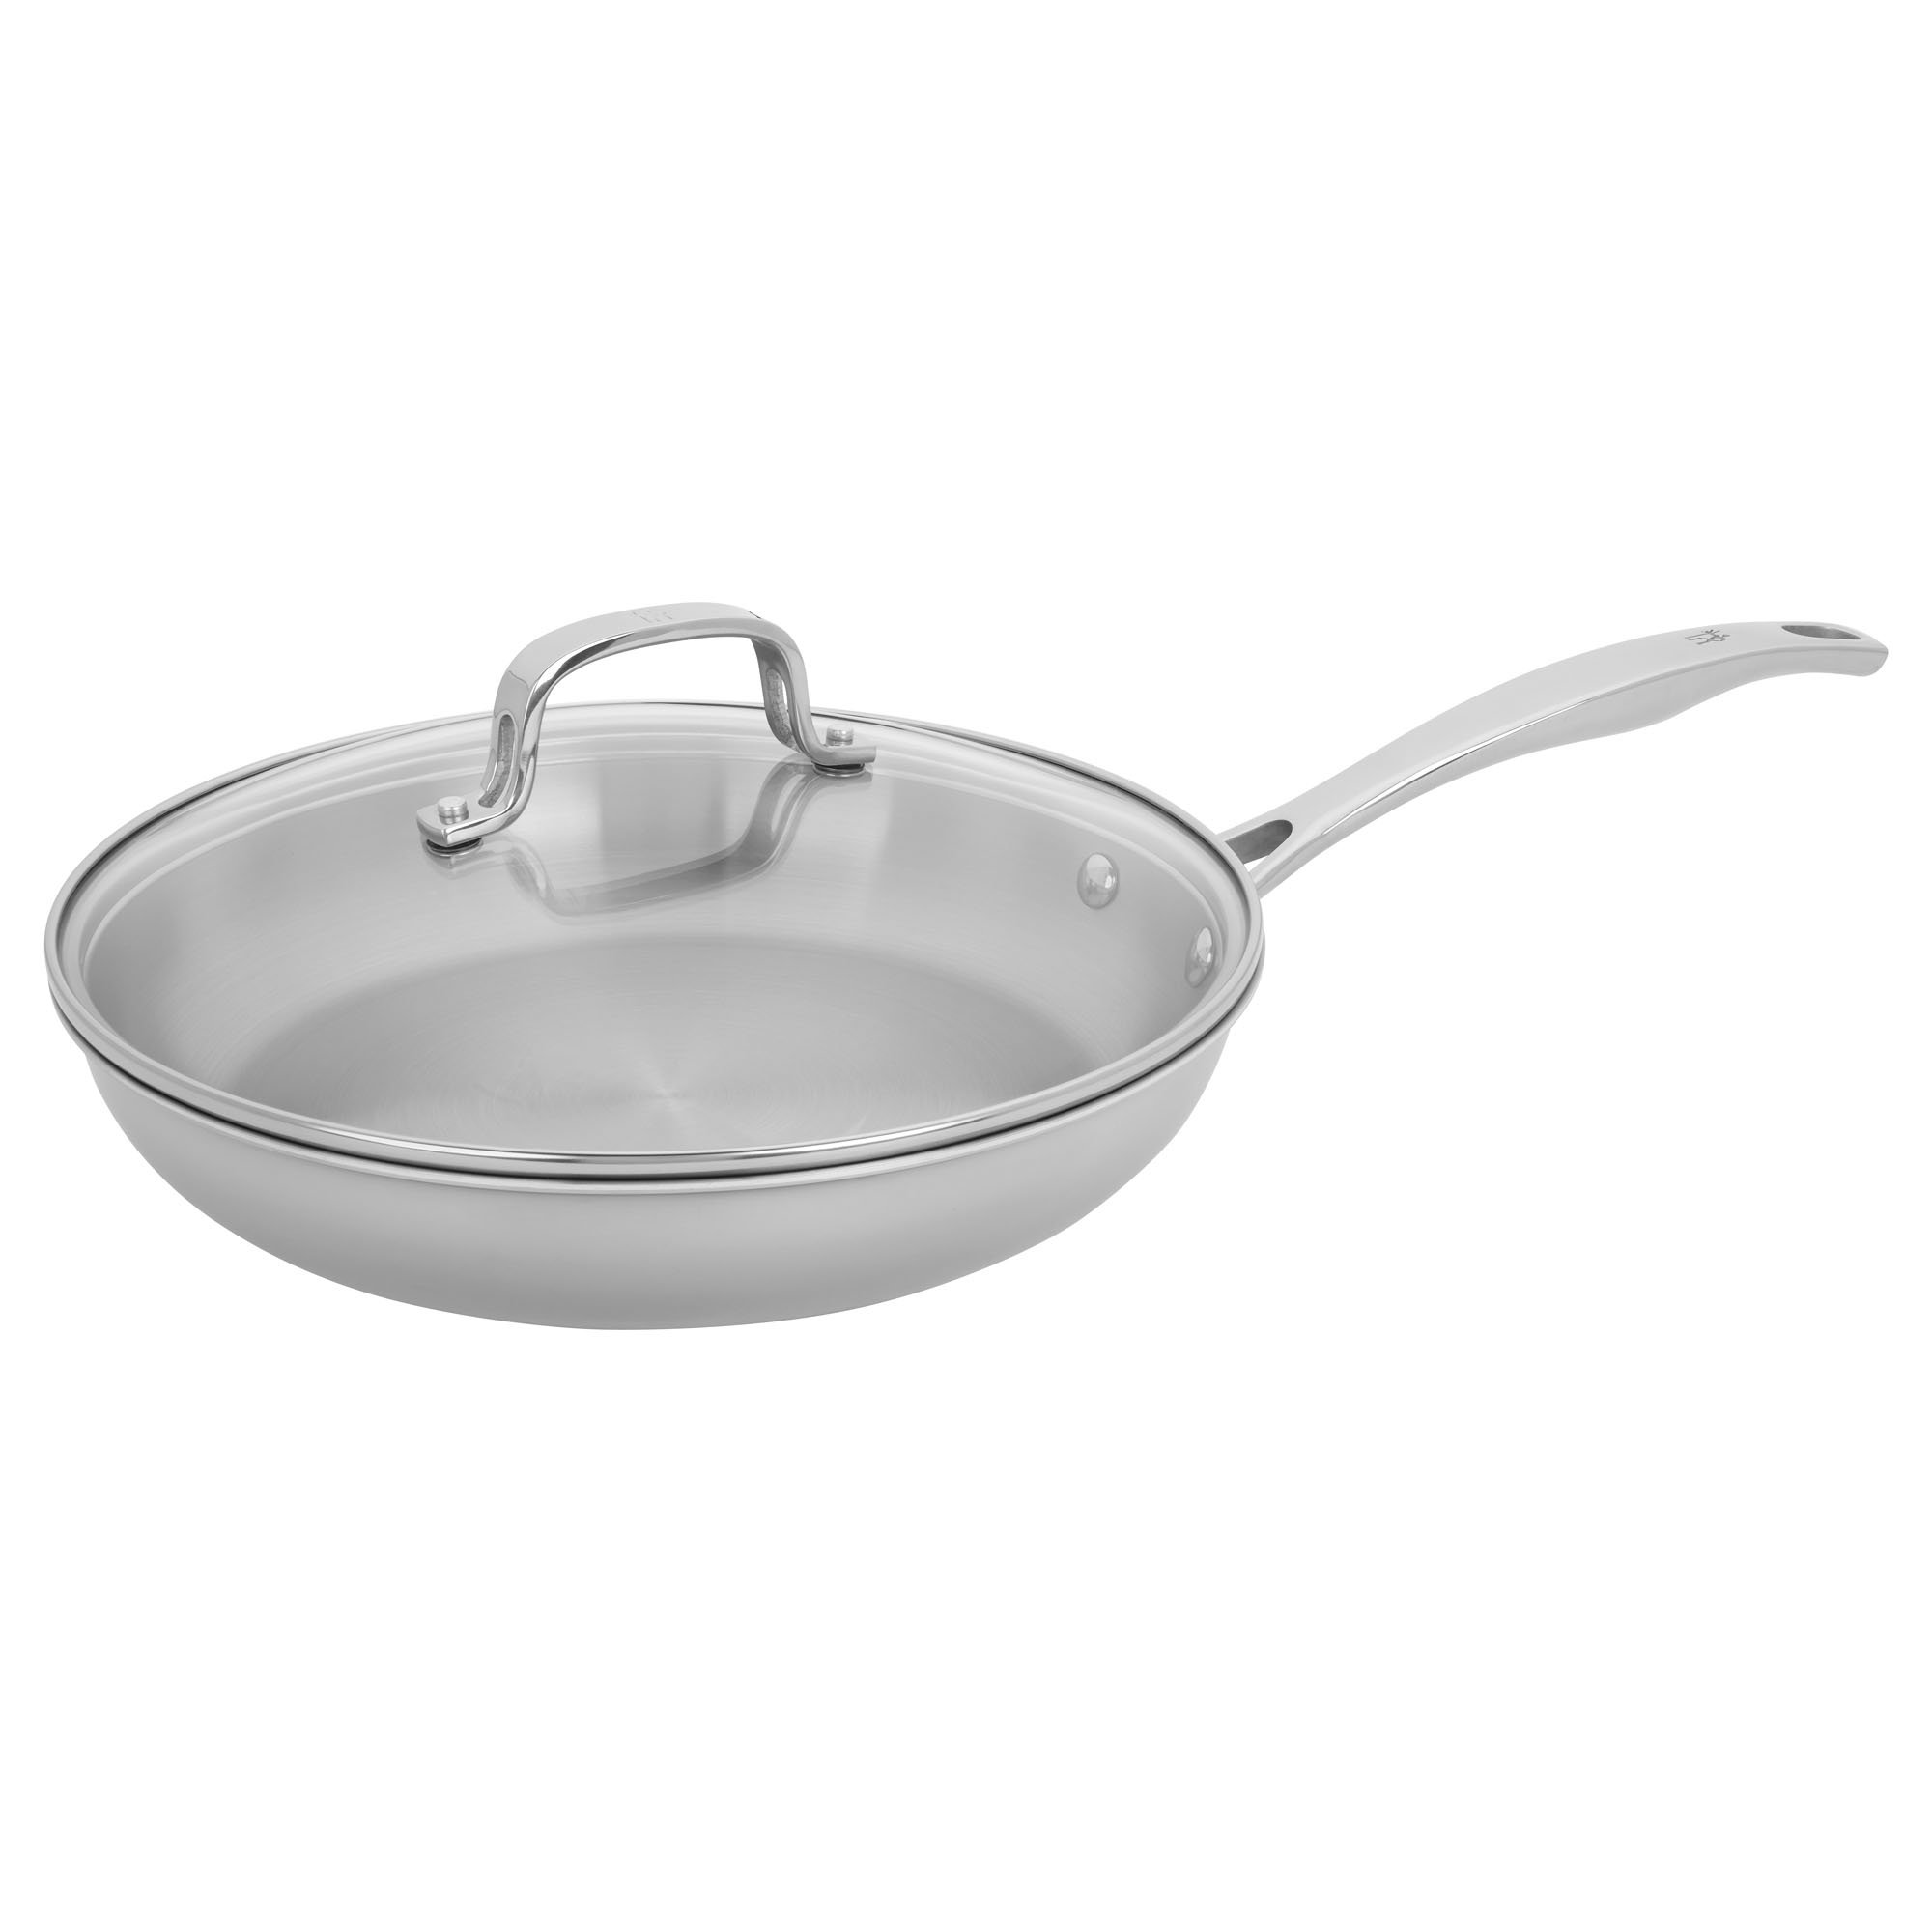 Henckels Clad H3 10-pc Stainless Steel Cookware Set